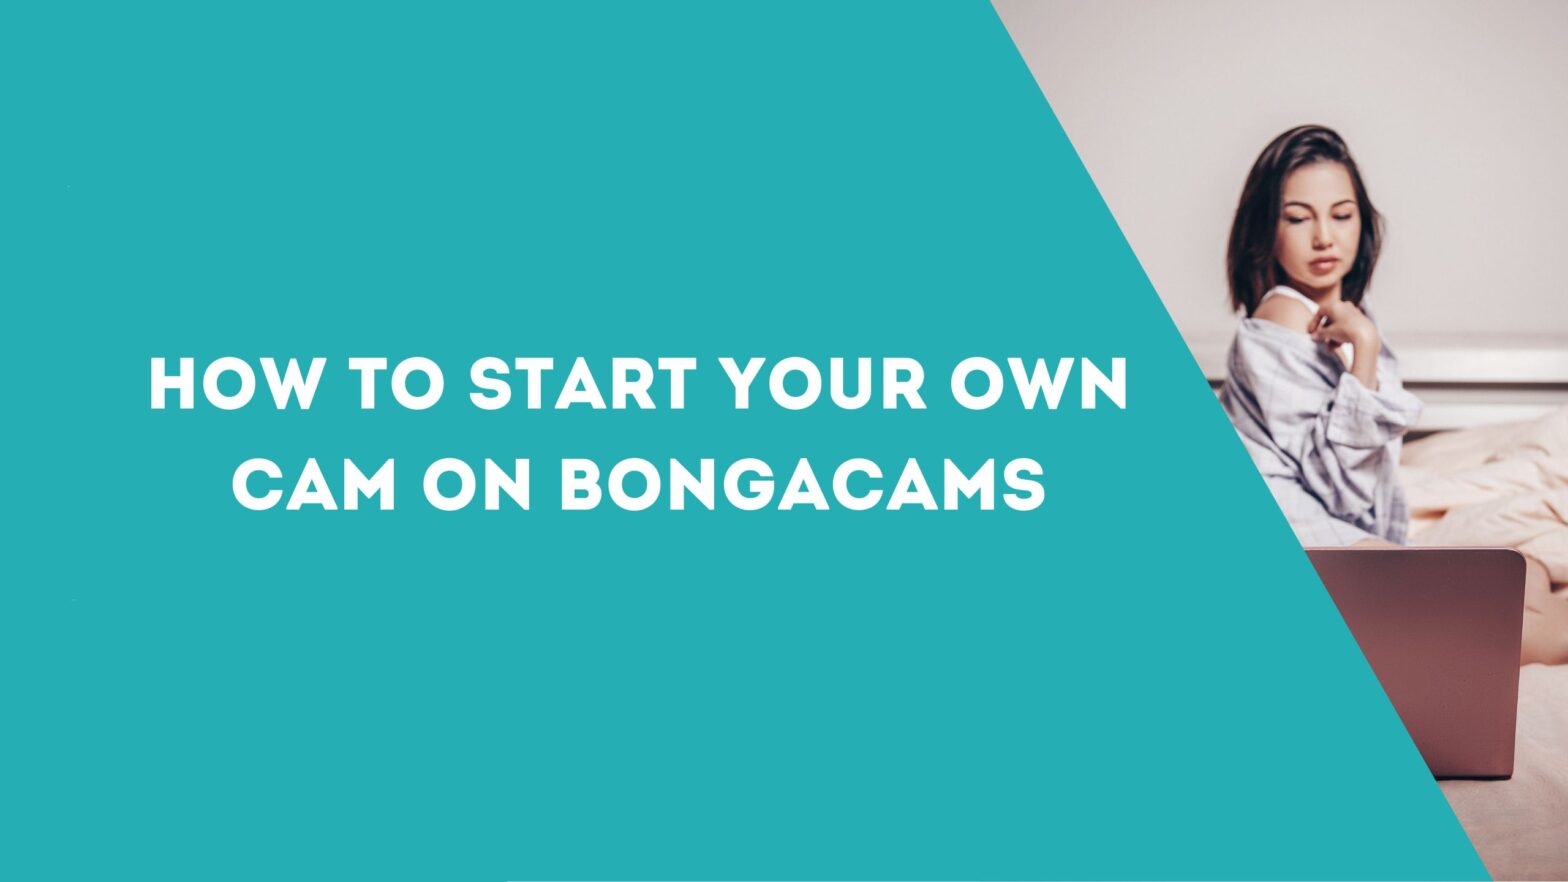 How to Start Your Own Cam on BongaCams